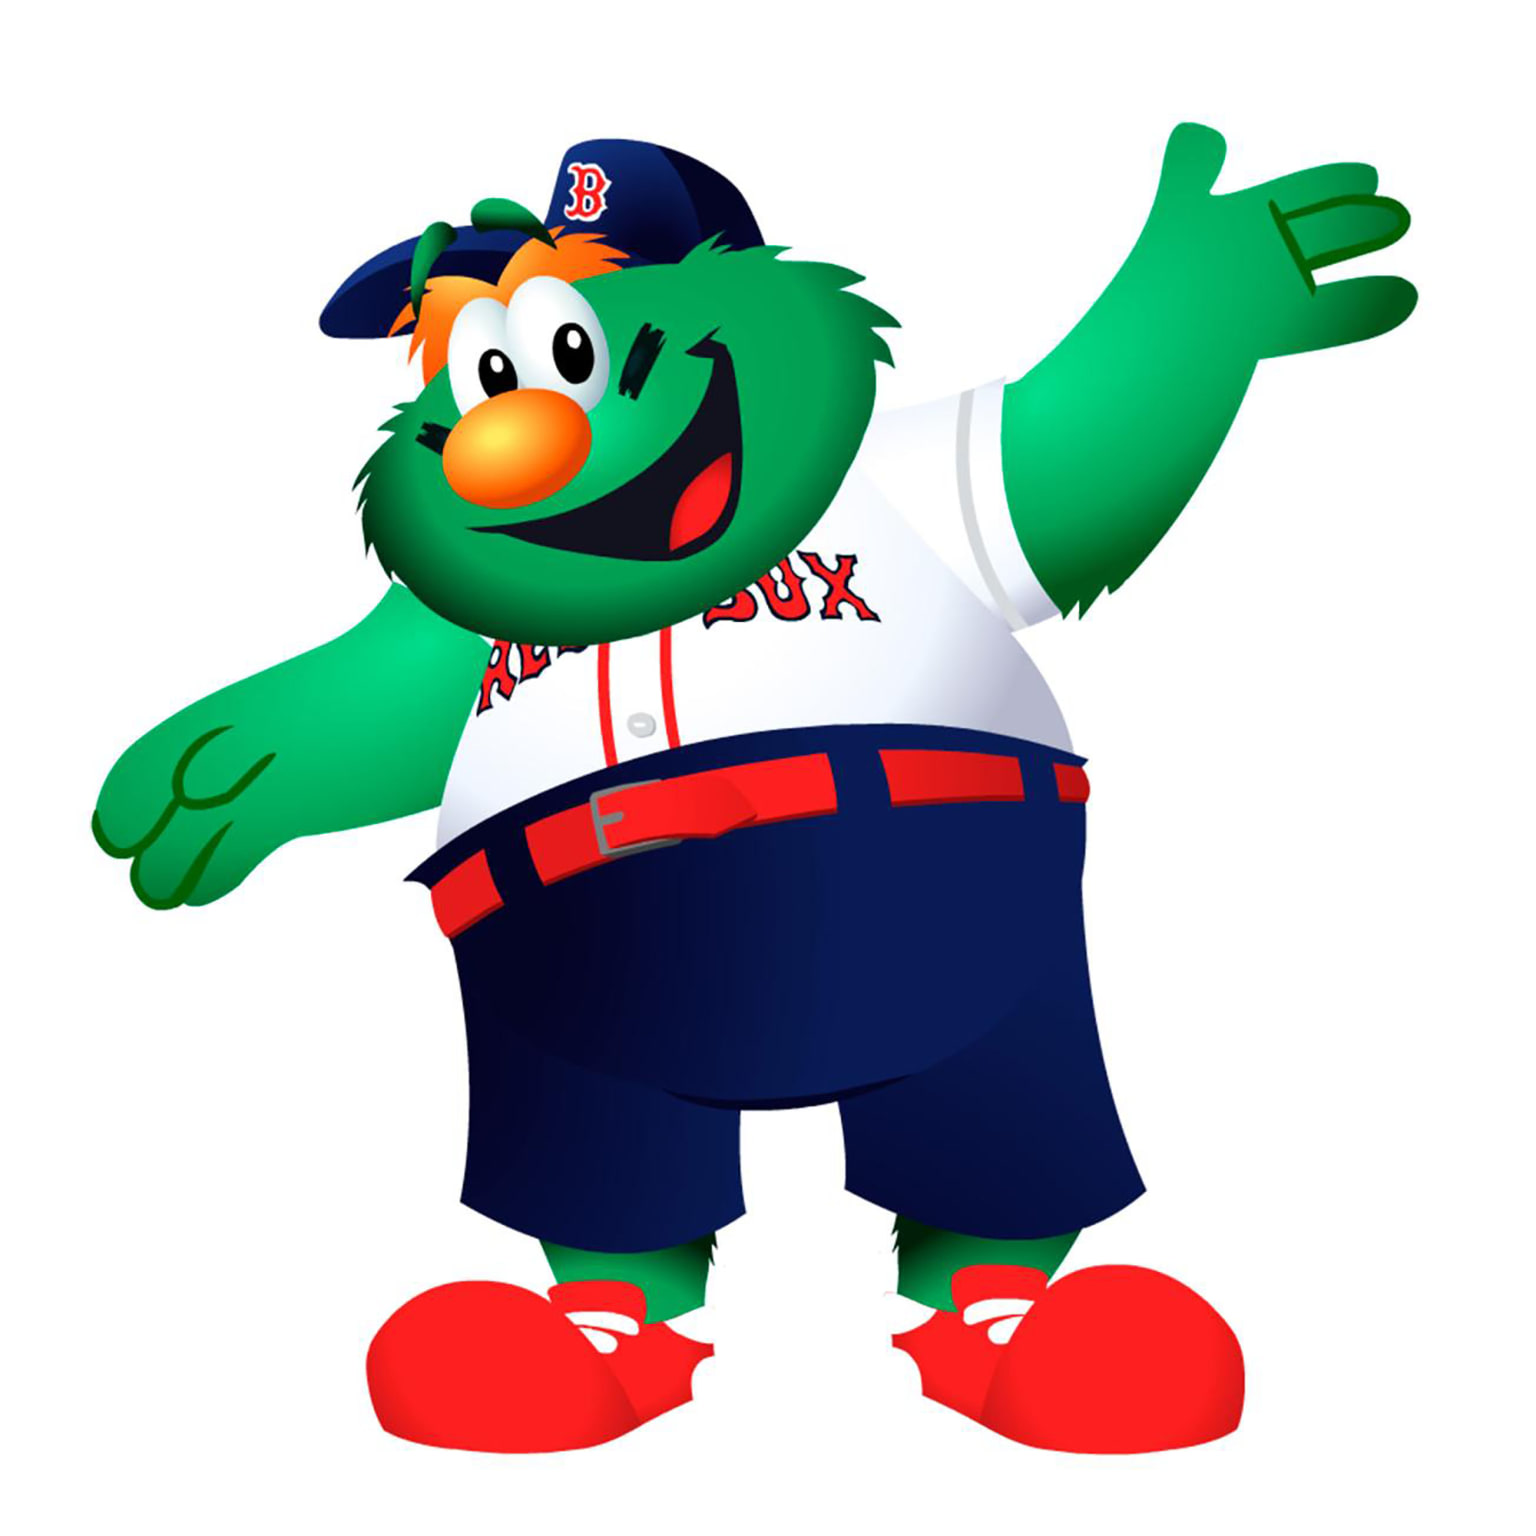 Sister Act: Red Sox Unveil New Mascot Sibling For Wally The Green Monster